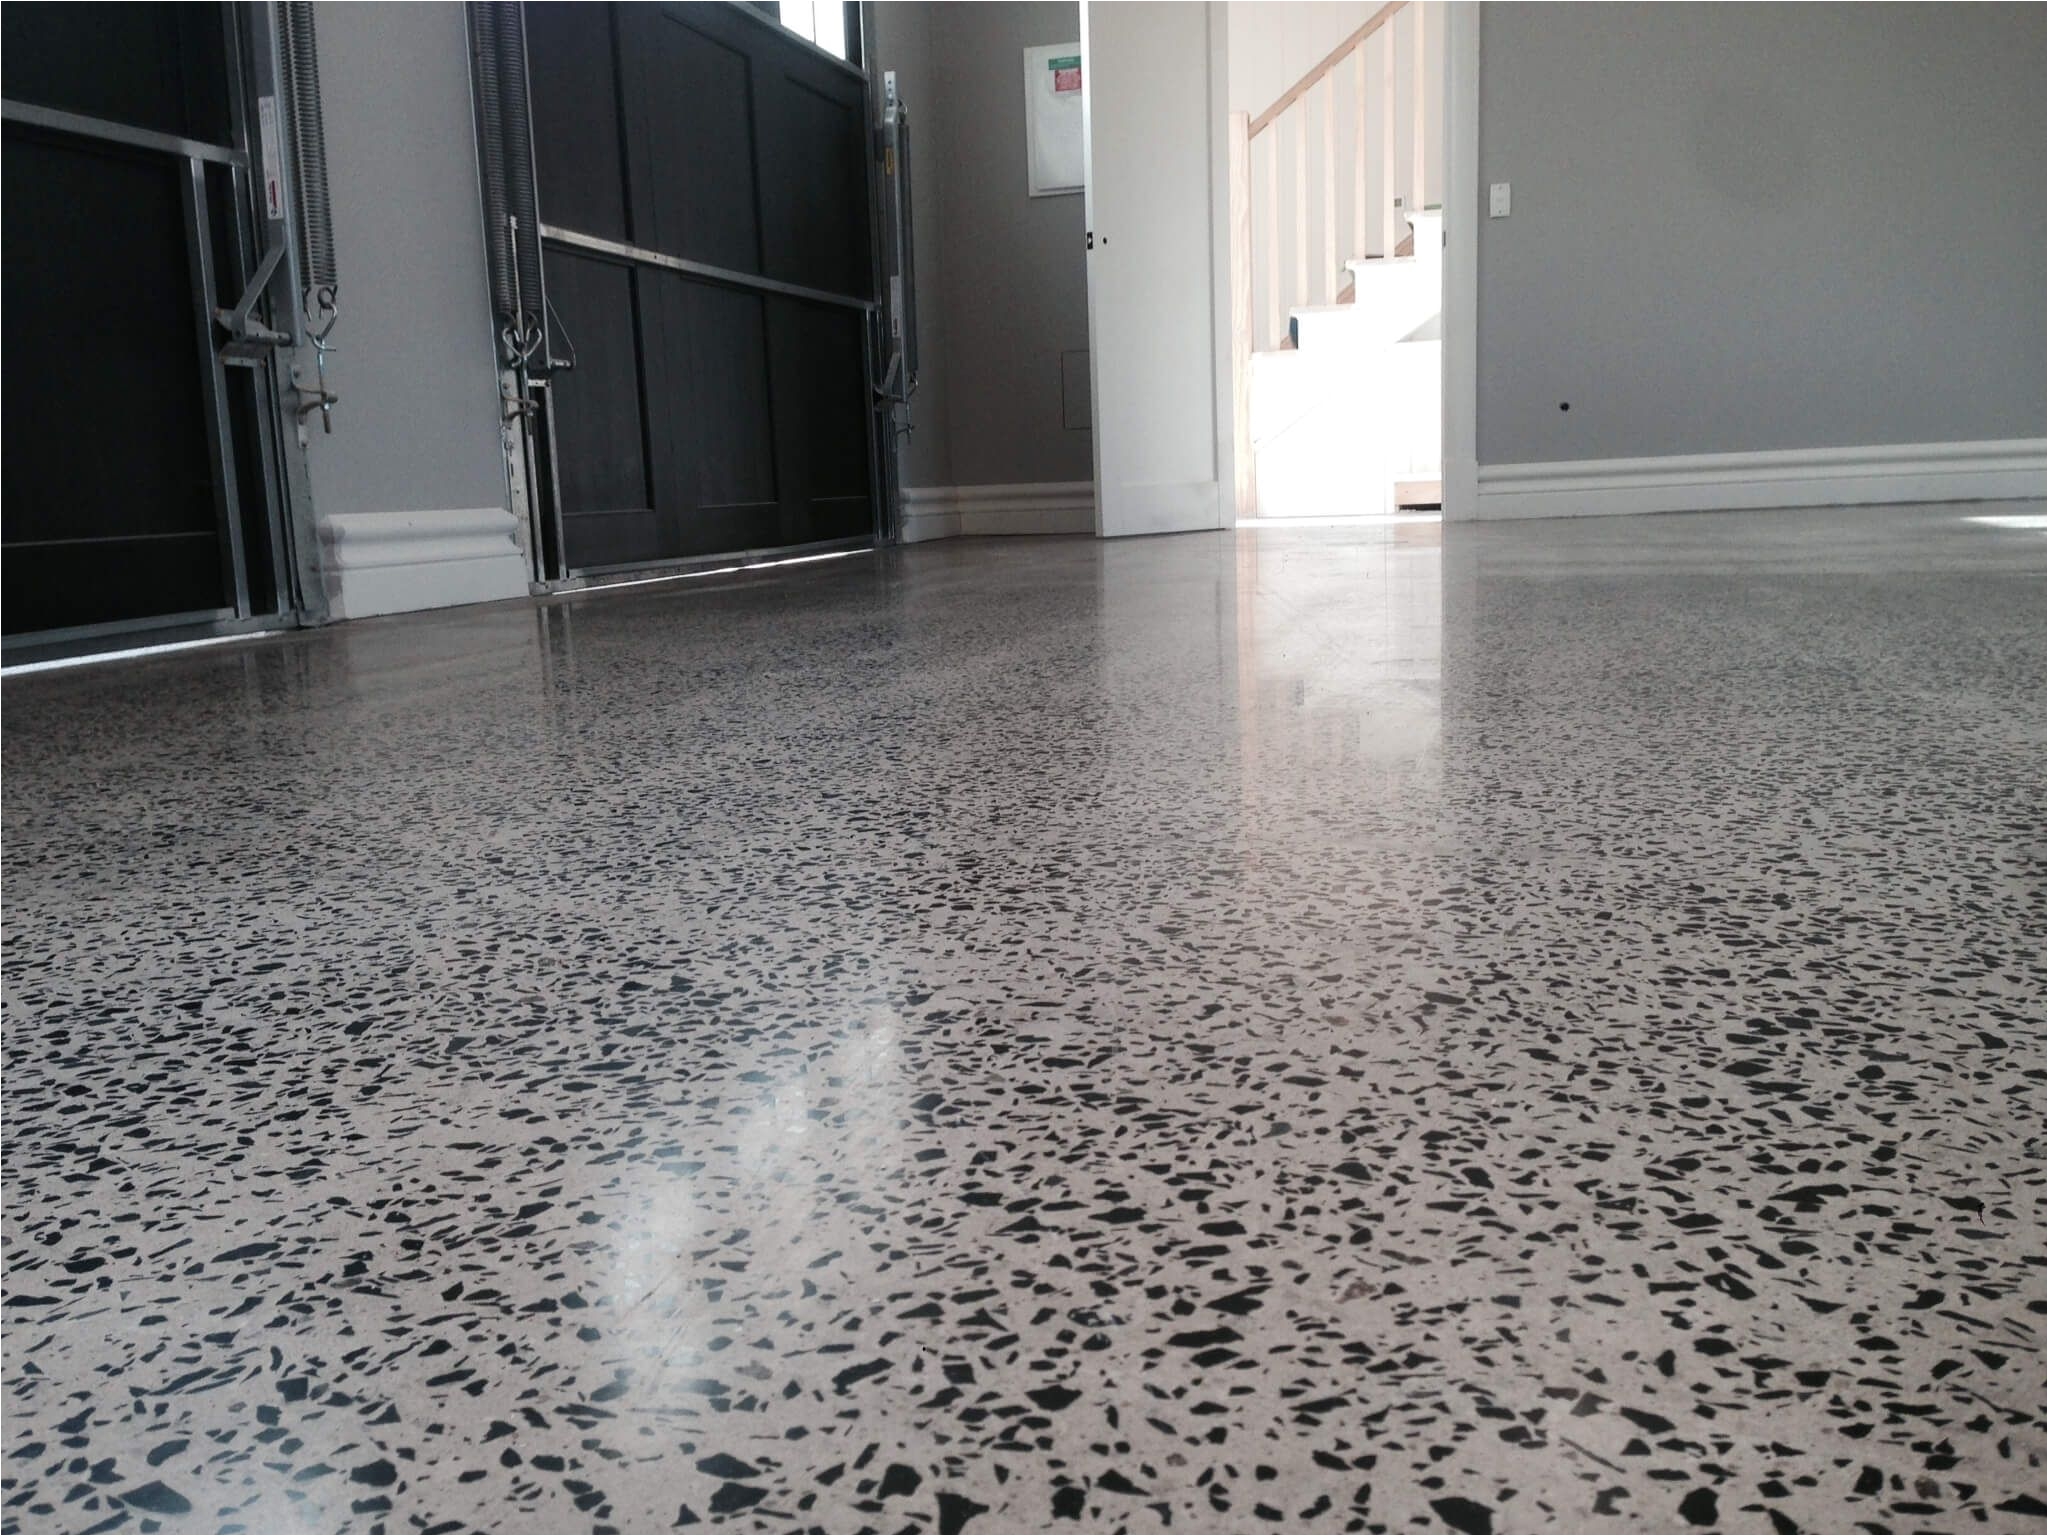 garage floor coatings like epoxy paint or concrete stain or coverings like snap together tiles or floor mats instantly improve your garage